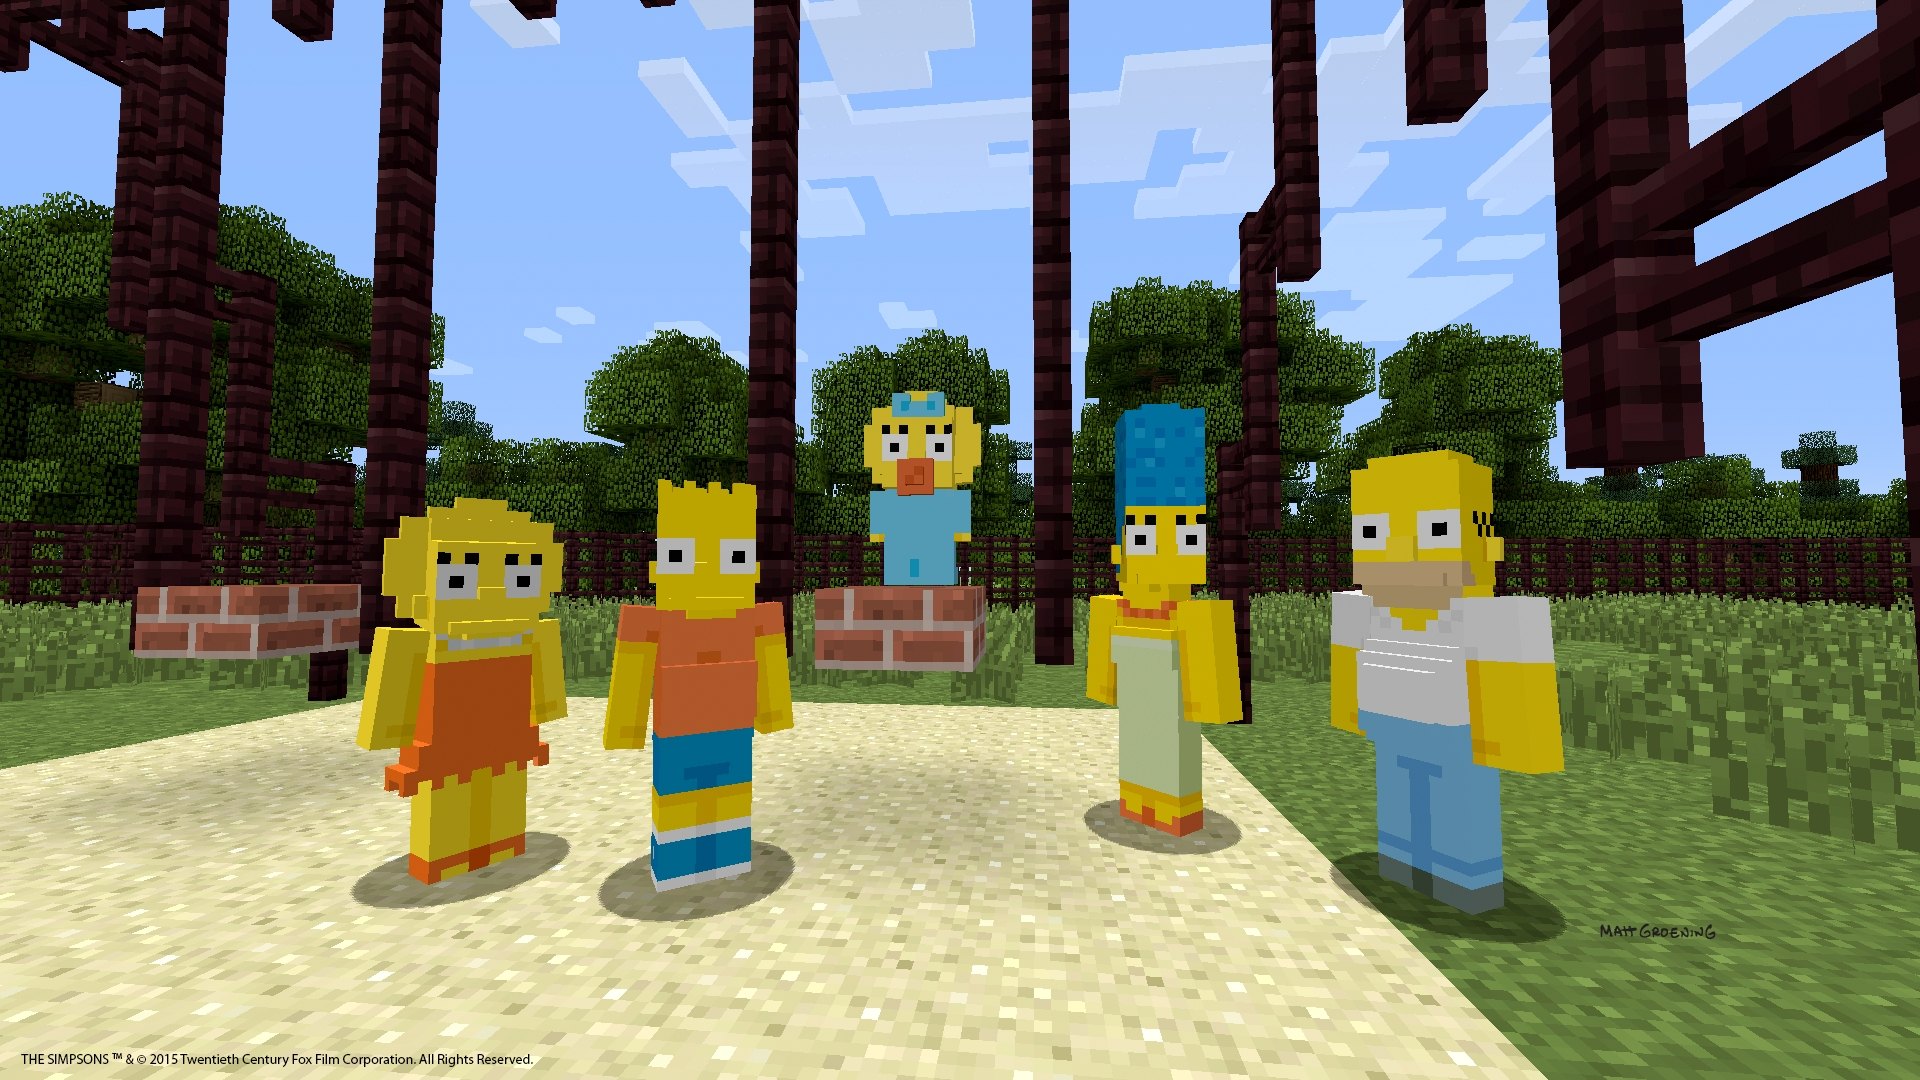 Minecraft Update And The Simpsons Dlc Coming To Ps4 Ps3 Ps Vita This Week